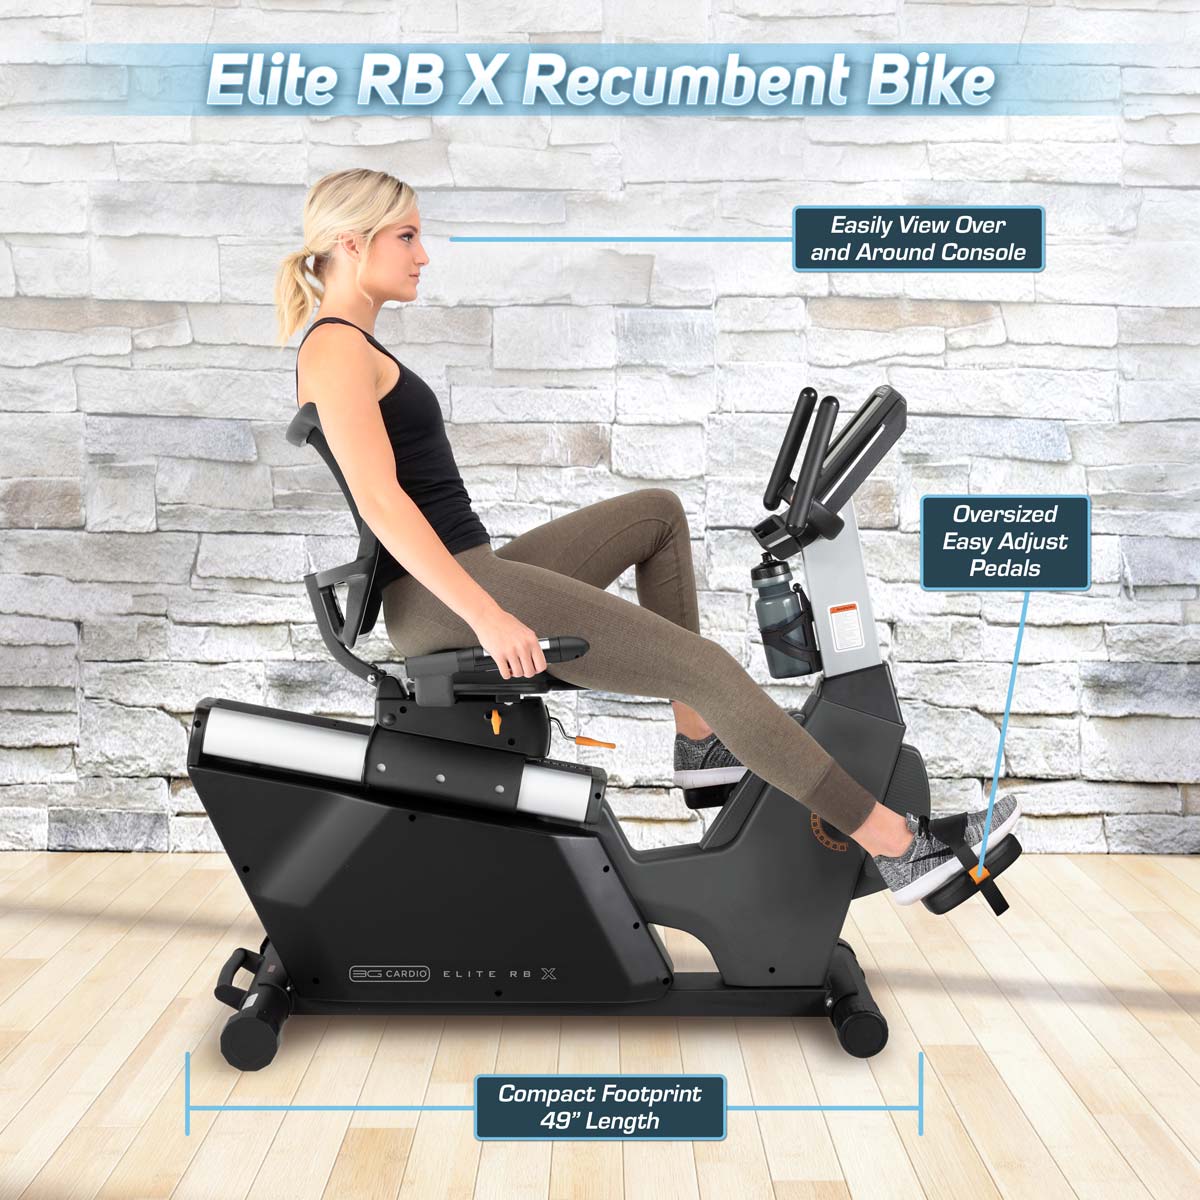 New and improved 3G Cardio Elite RB X Recumbent Bike is a winner for many reasons